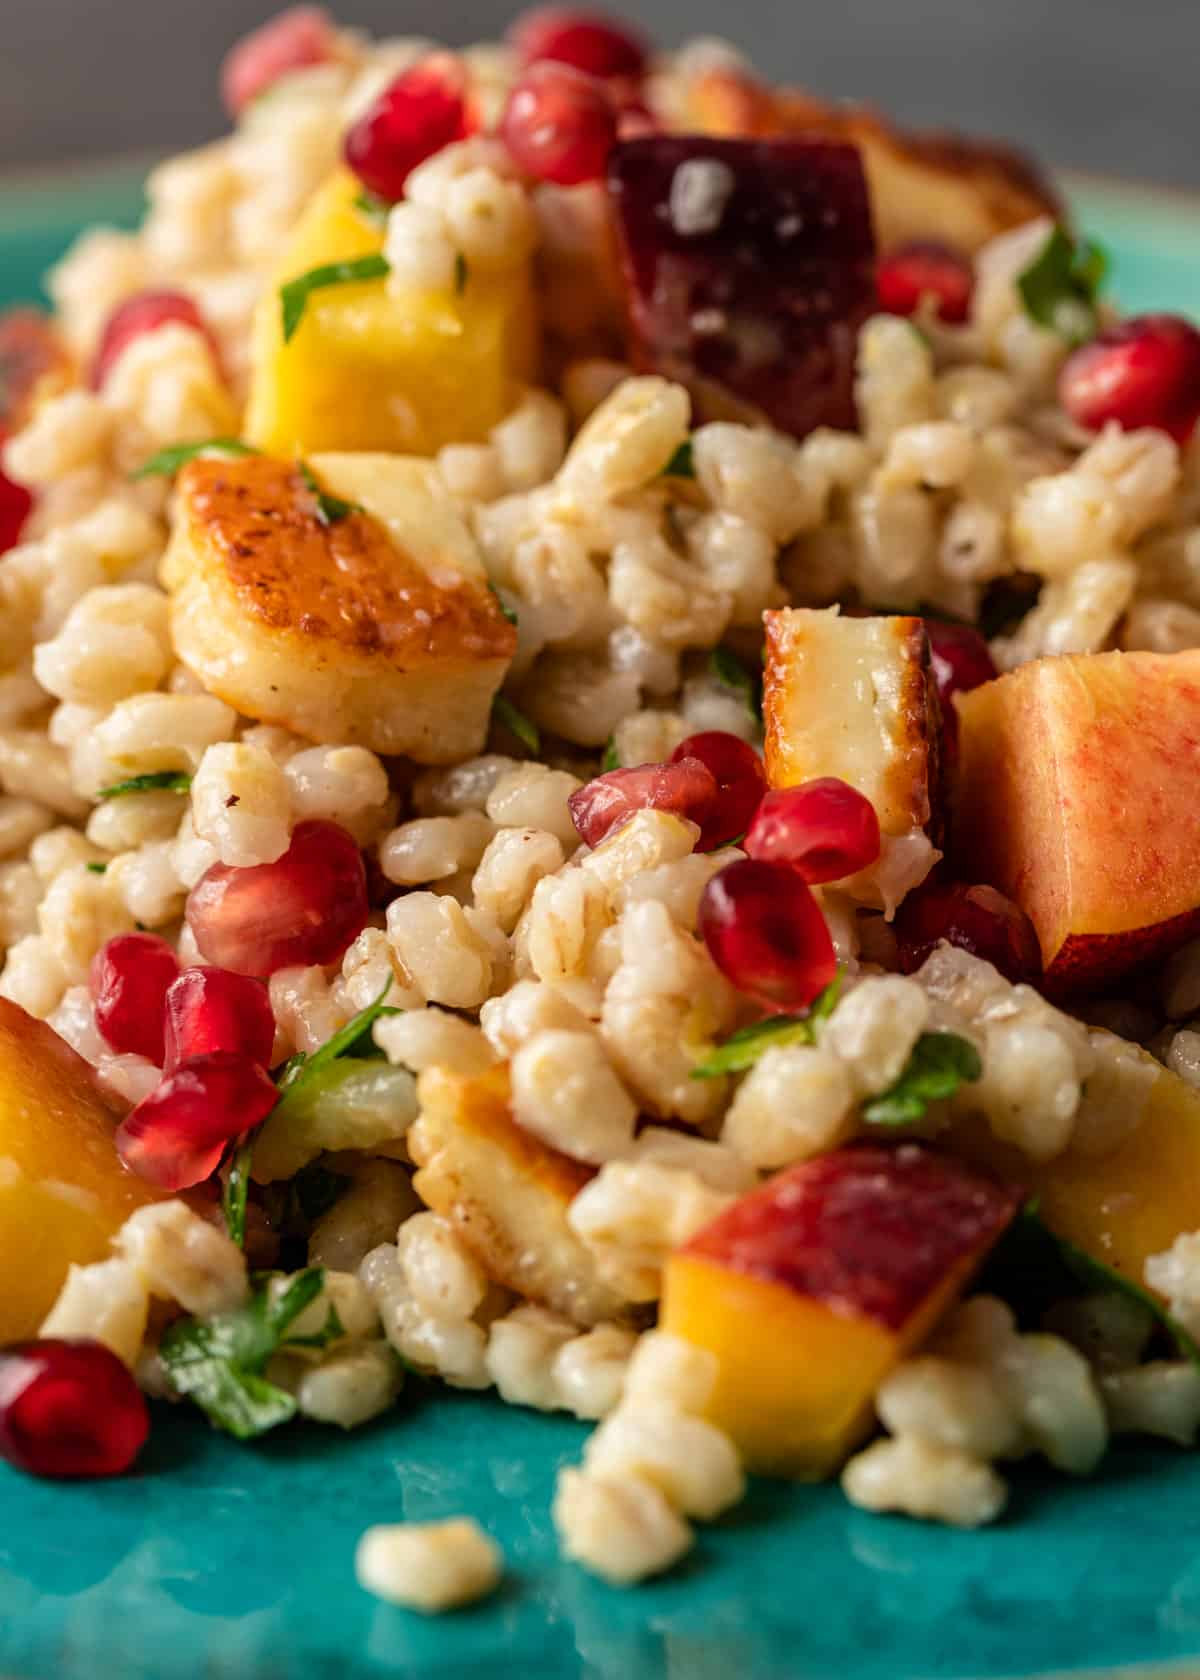 extreme closeup: peach and barley salad with pomegranate and fresh herbs